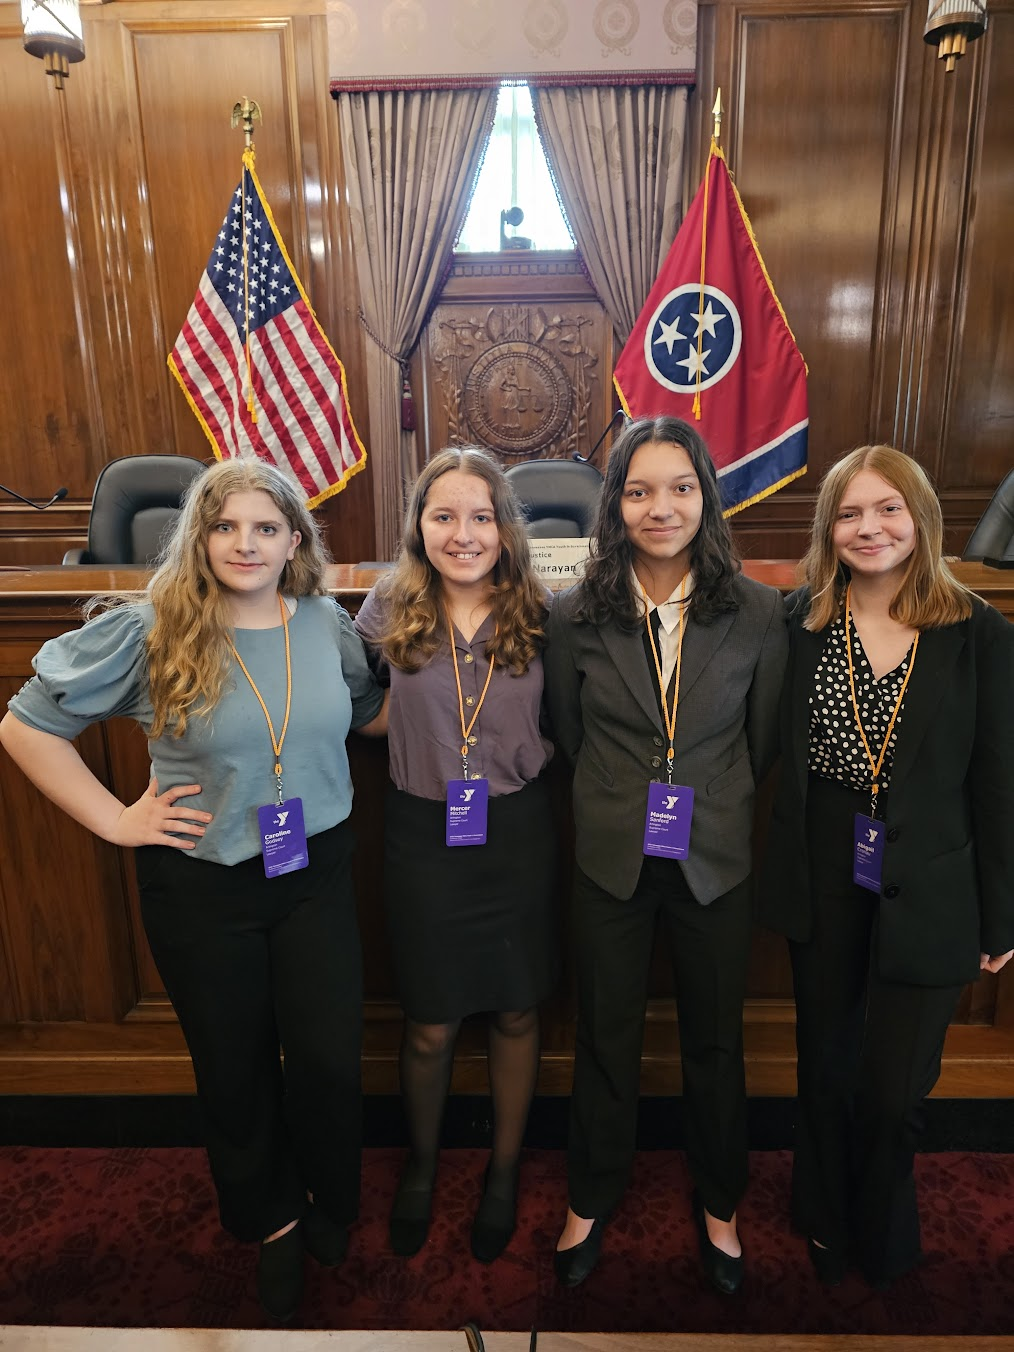 Students pose for picture in the Tennessee Supreme Court